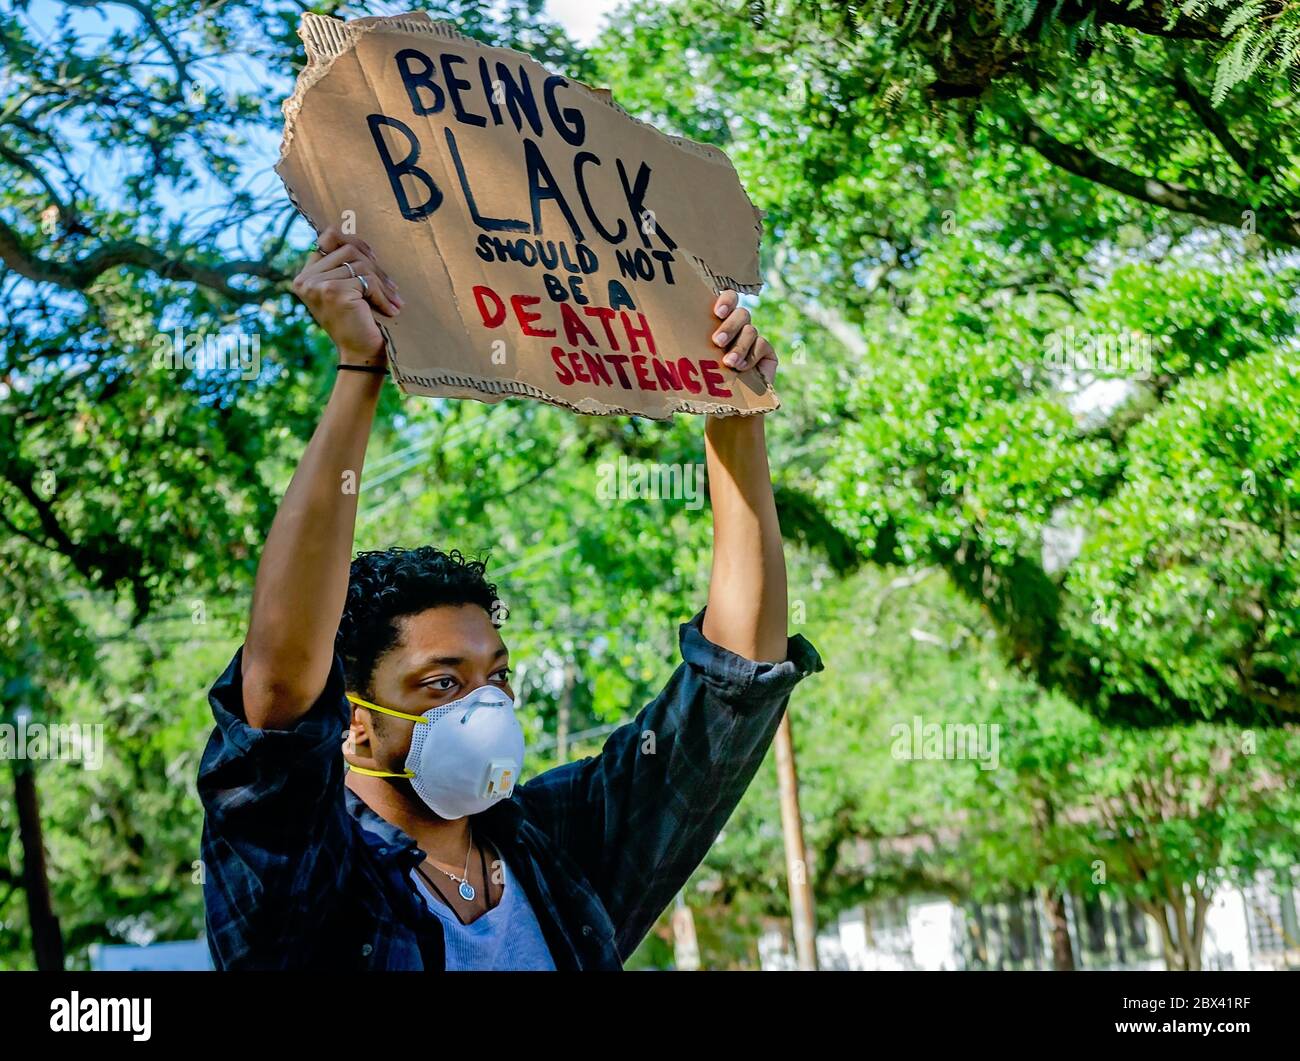 A protestor holds up a sign while at a protest against police brutality, June 4, 2020, at Memorial Park in Mobile, Alabama. Stock Photo